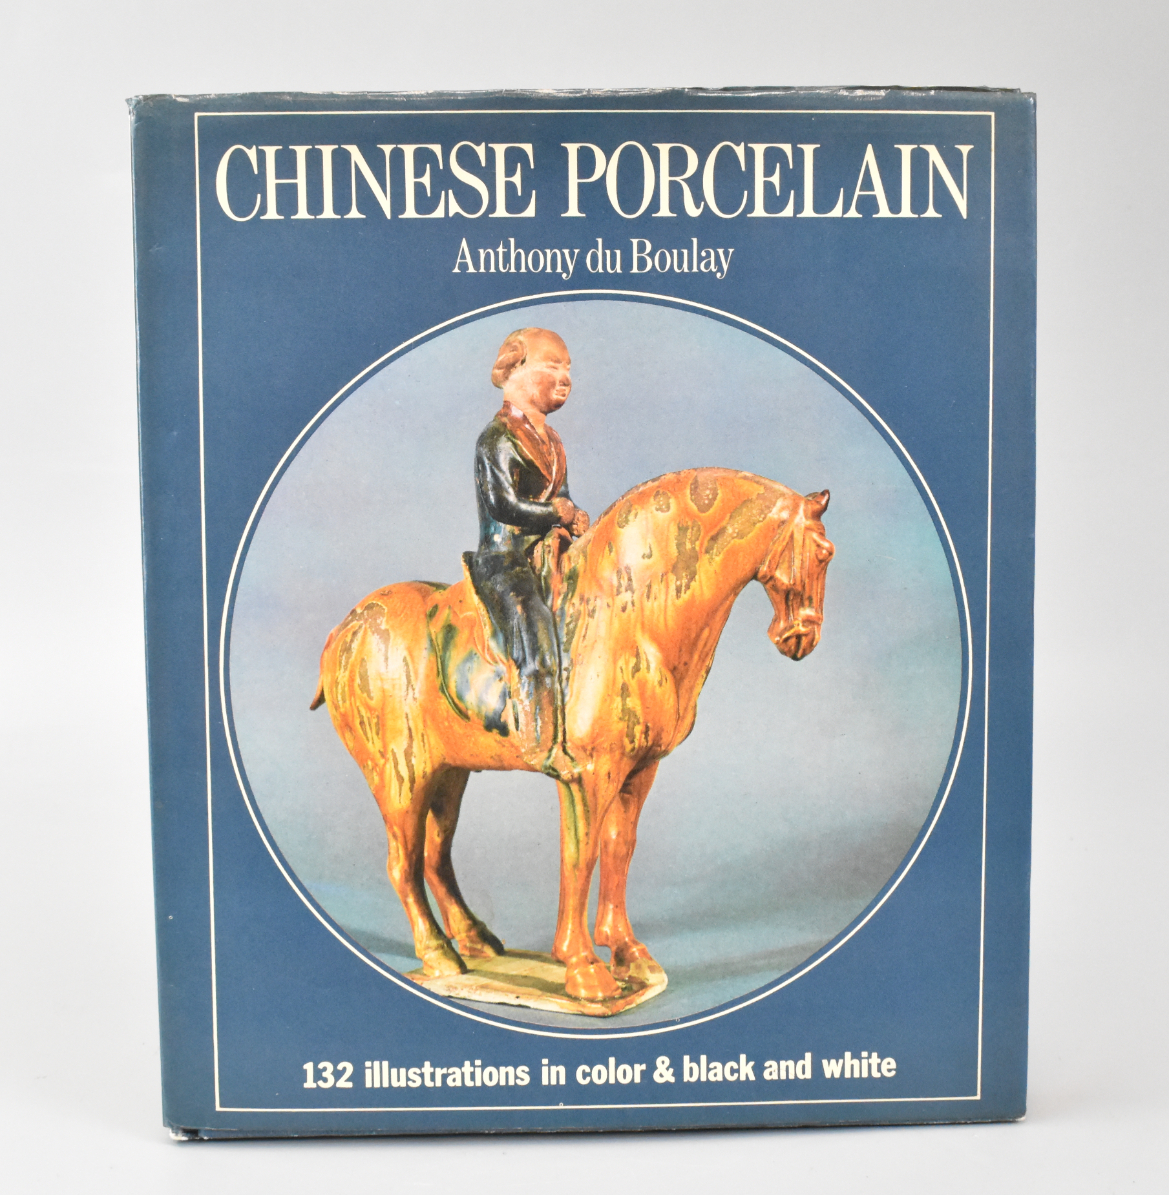 CHINESE PORCELAIN BOOK BY ANTHONY 301d45